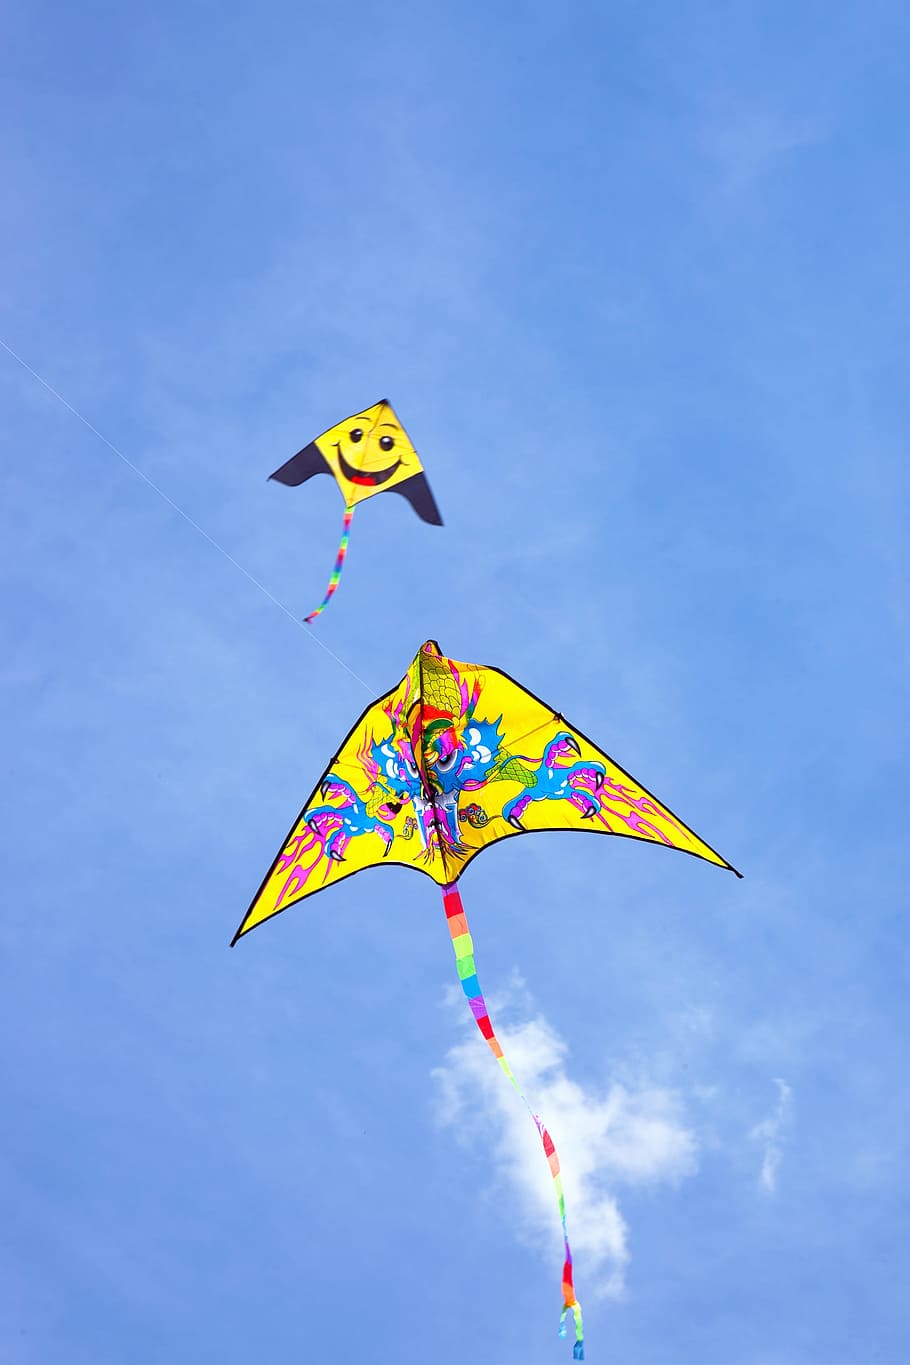 air, fly, fun, kite, play, recreation, sky, summer, toy, vacation